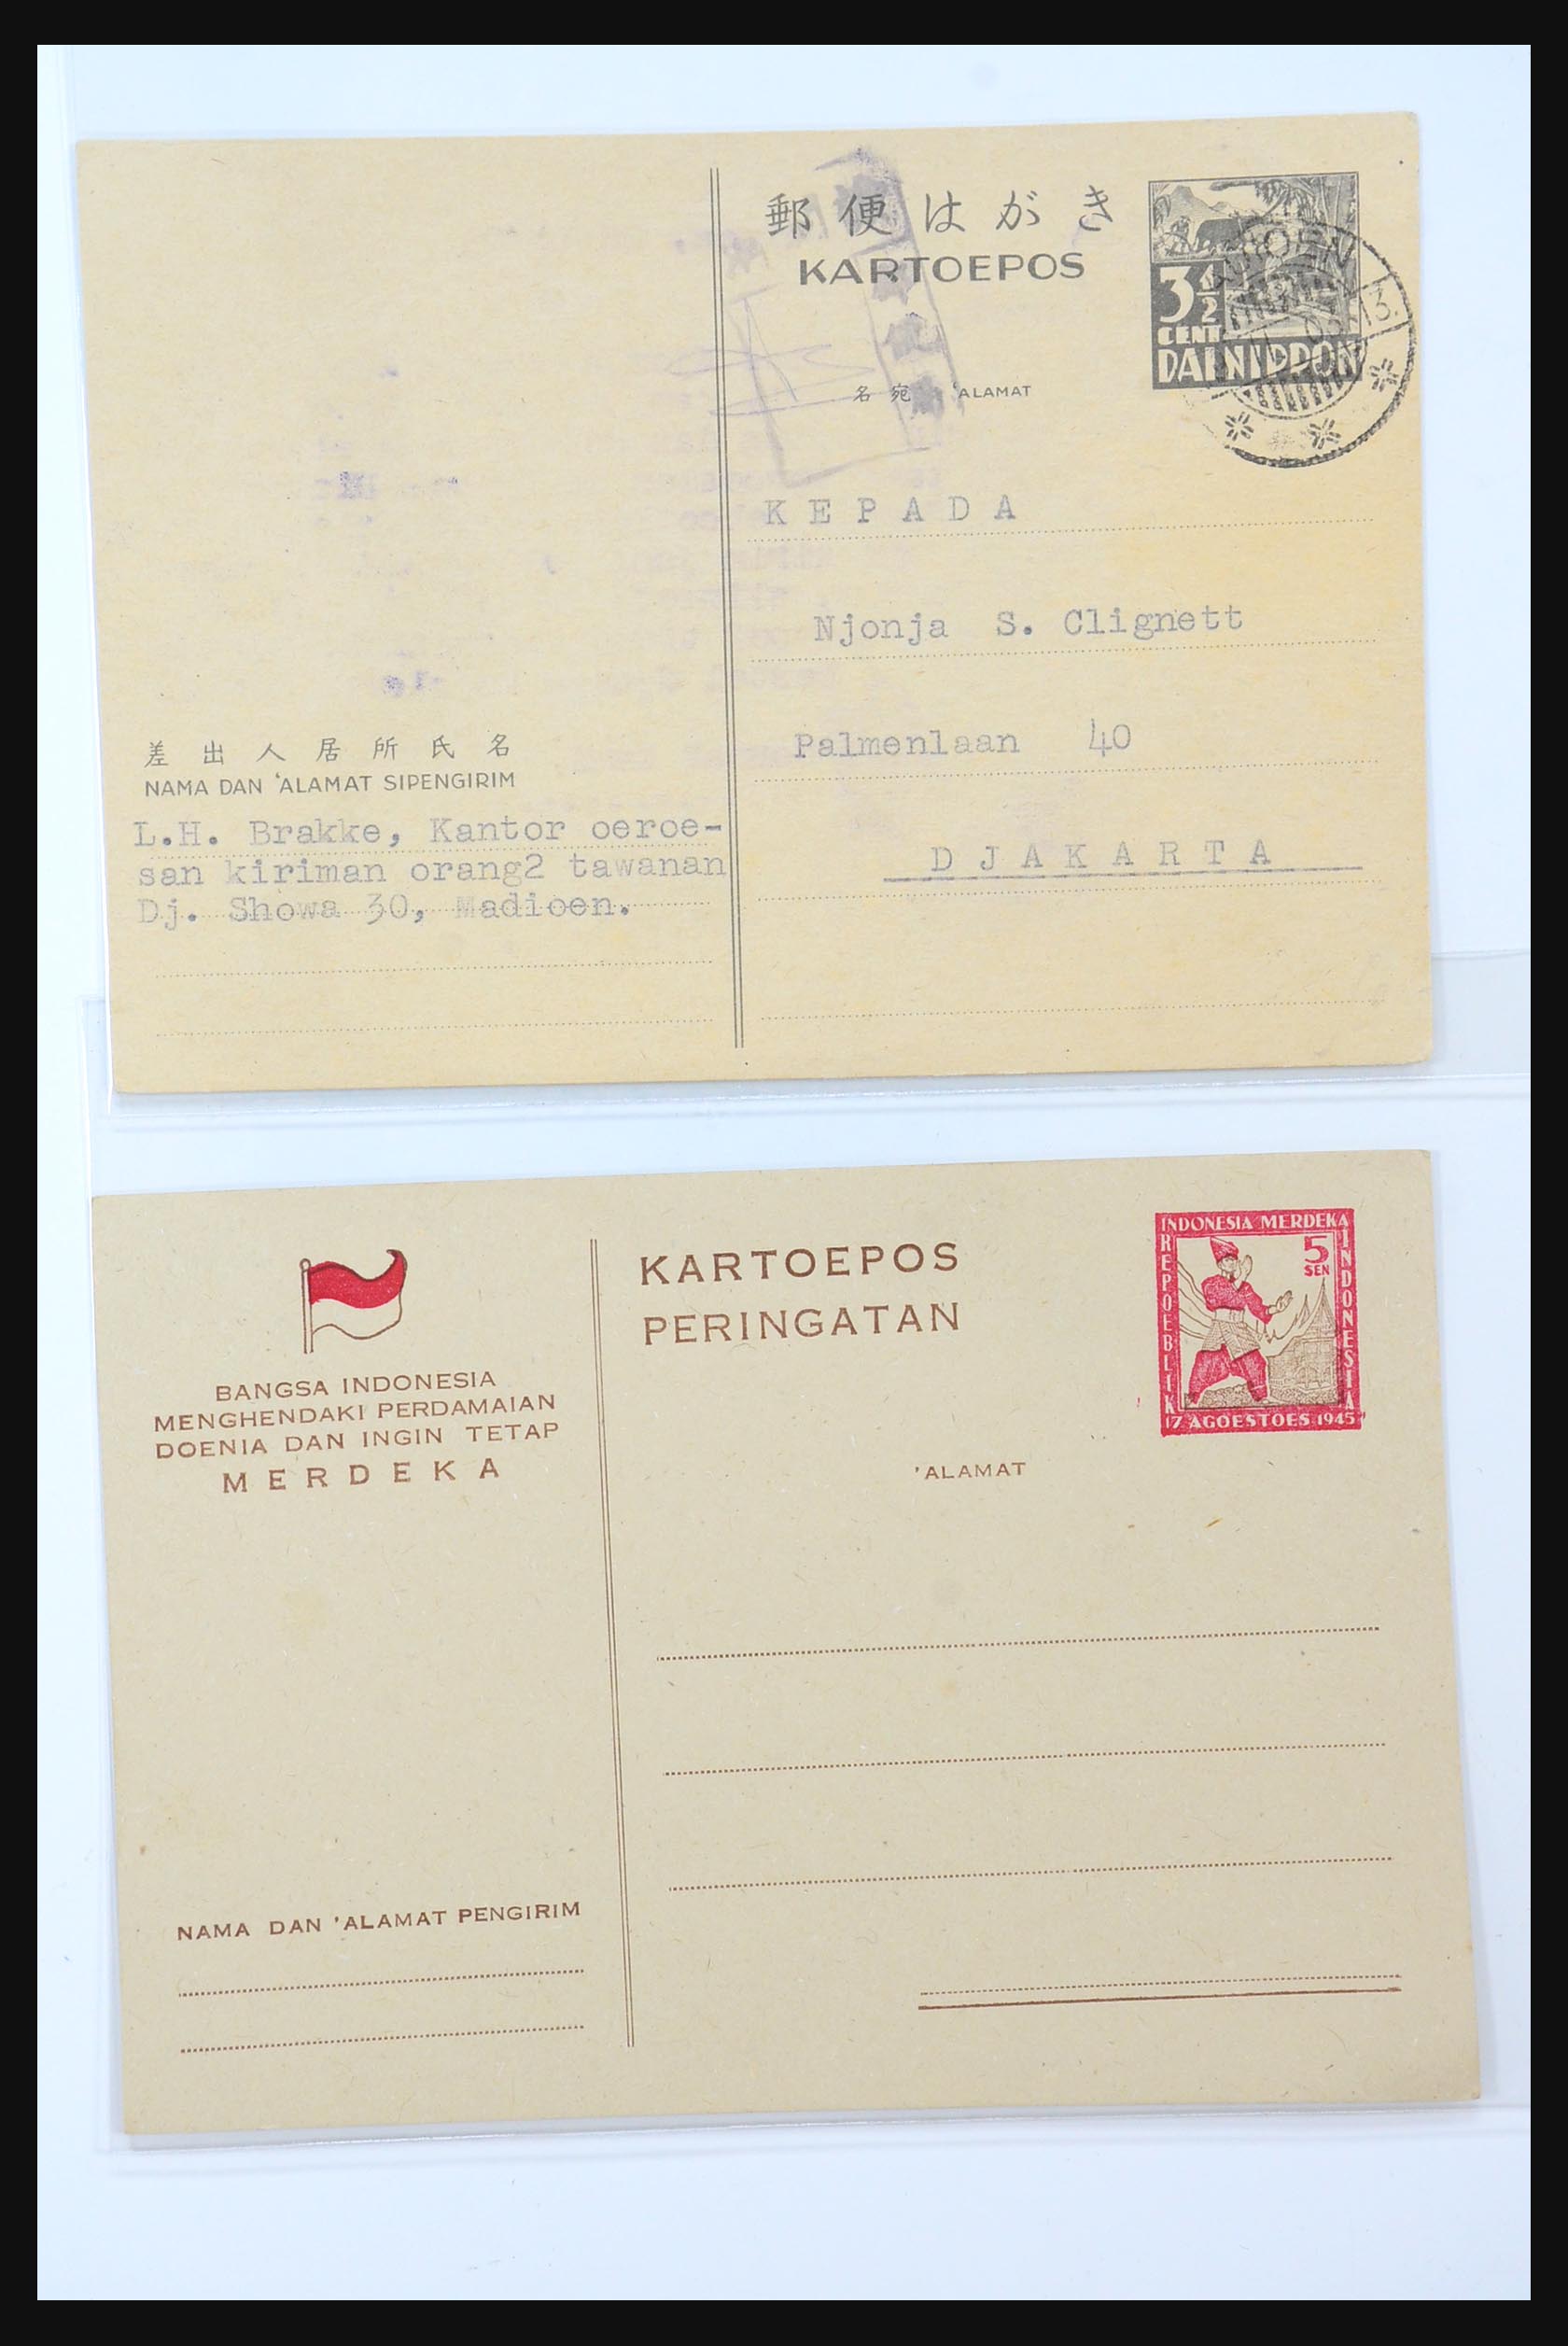 31362 007 - 31362 Netherlands Indies Japanese occupation covers 1942-1945.